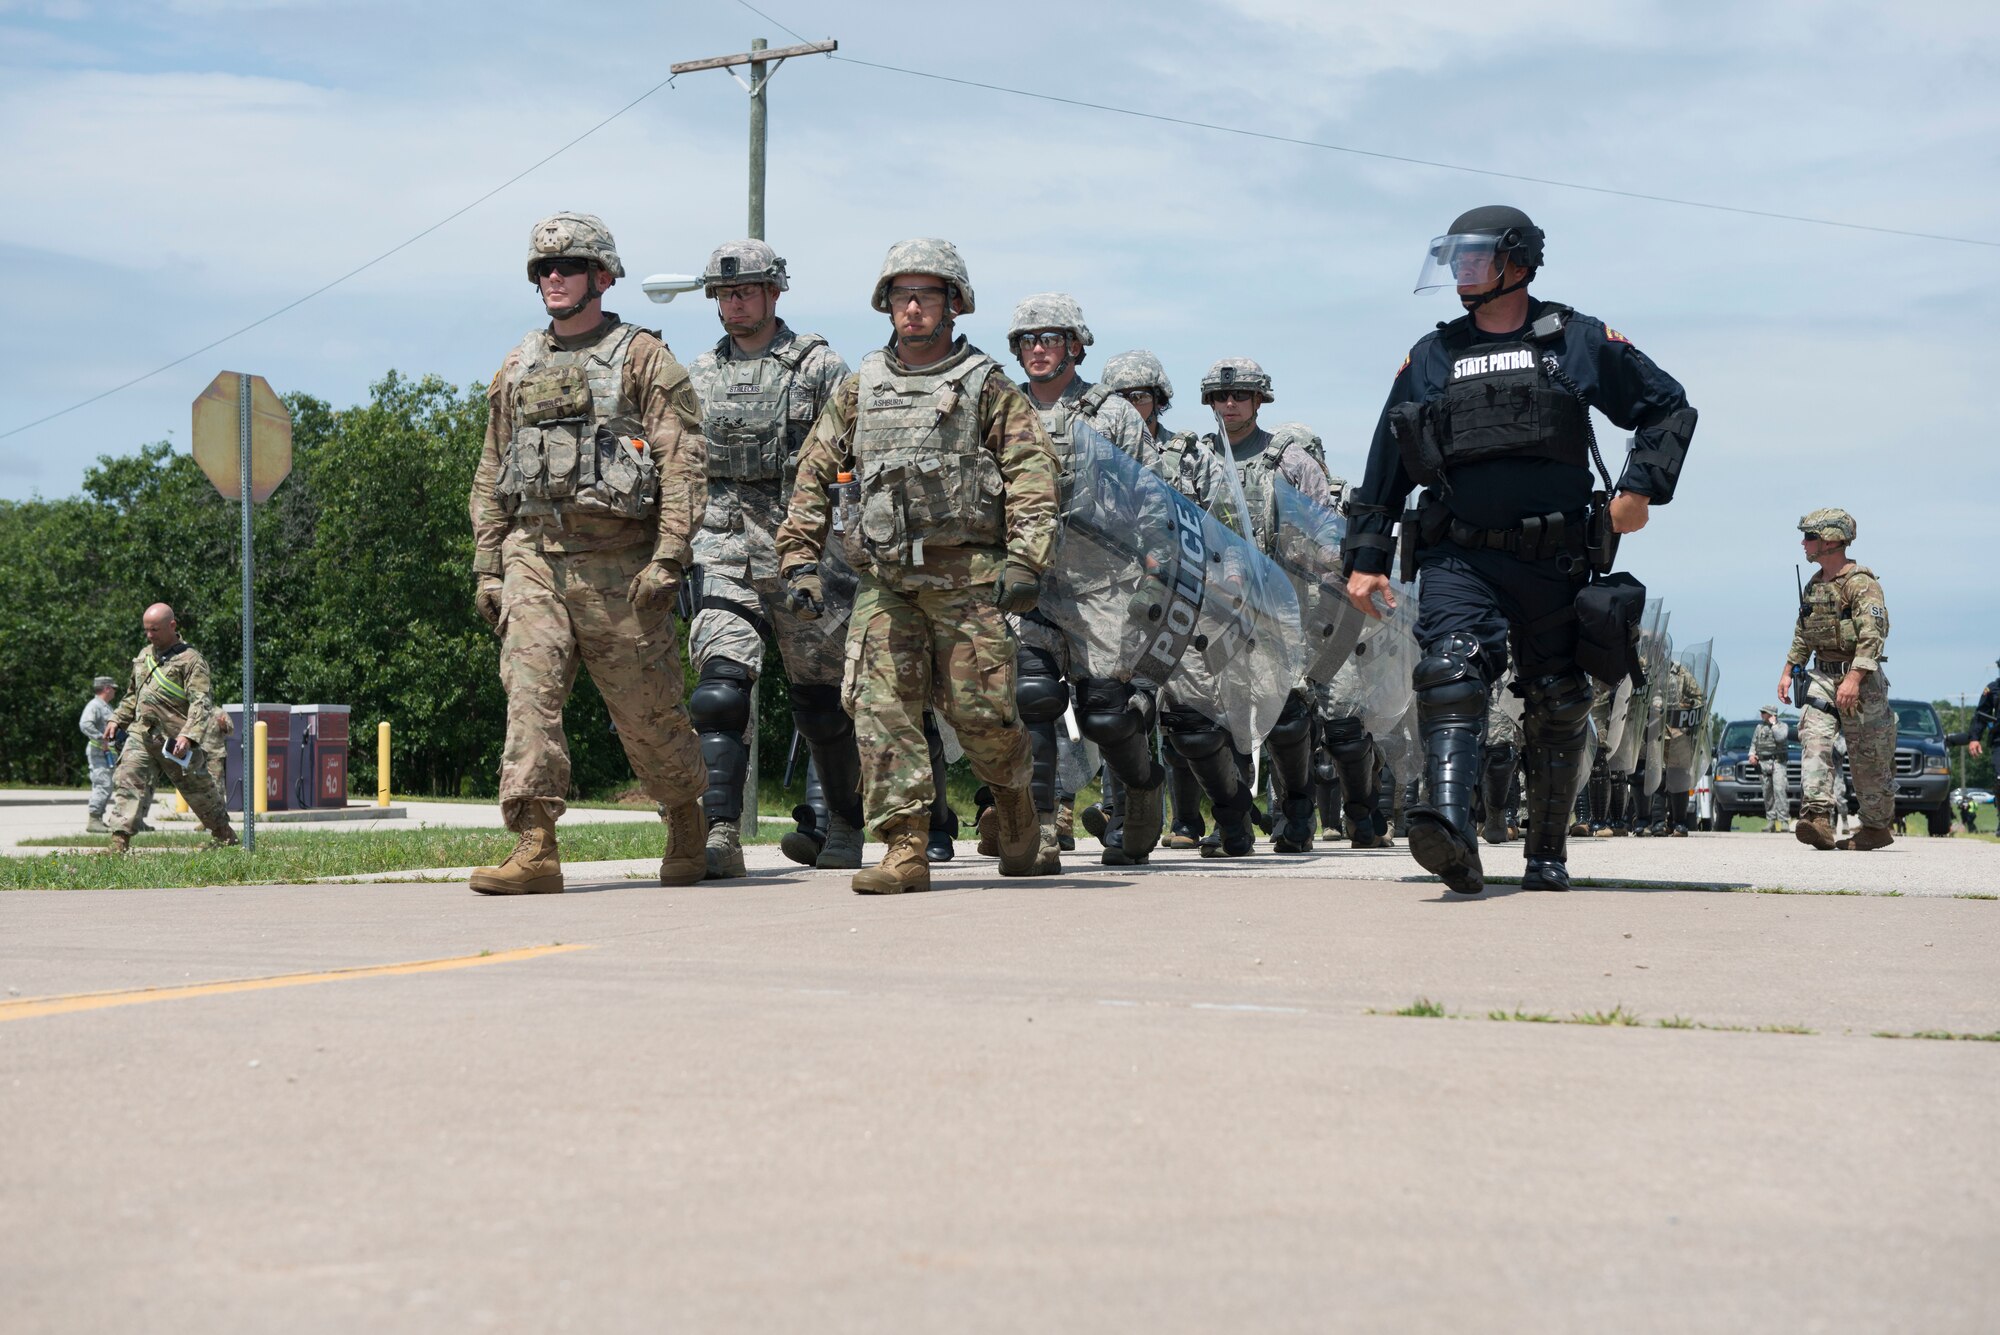 National Guardsmen assigned to the New Hampshire Army National Guard and the New Hampshire and Connecticut  Air National Guard march in formation with members of the Wisconsin State Patrol in a riot-control scenario during the PATRIOT North 19 domestic operations exercise, July 18, 2019 at Fort McCoy, WI. PATRIOT North is an annual domestic operations exercise, which tests the ability of the National Guard to work together with local, state and federal entities to respond to emergencies. (U.S. Air National Guard photo by Tech. Sgt. Tamara R. Dabney